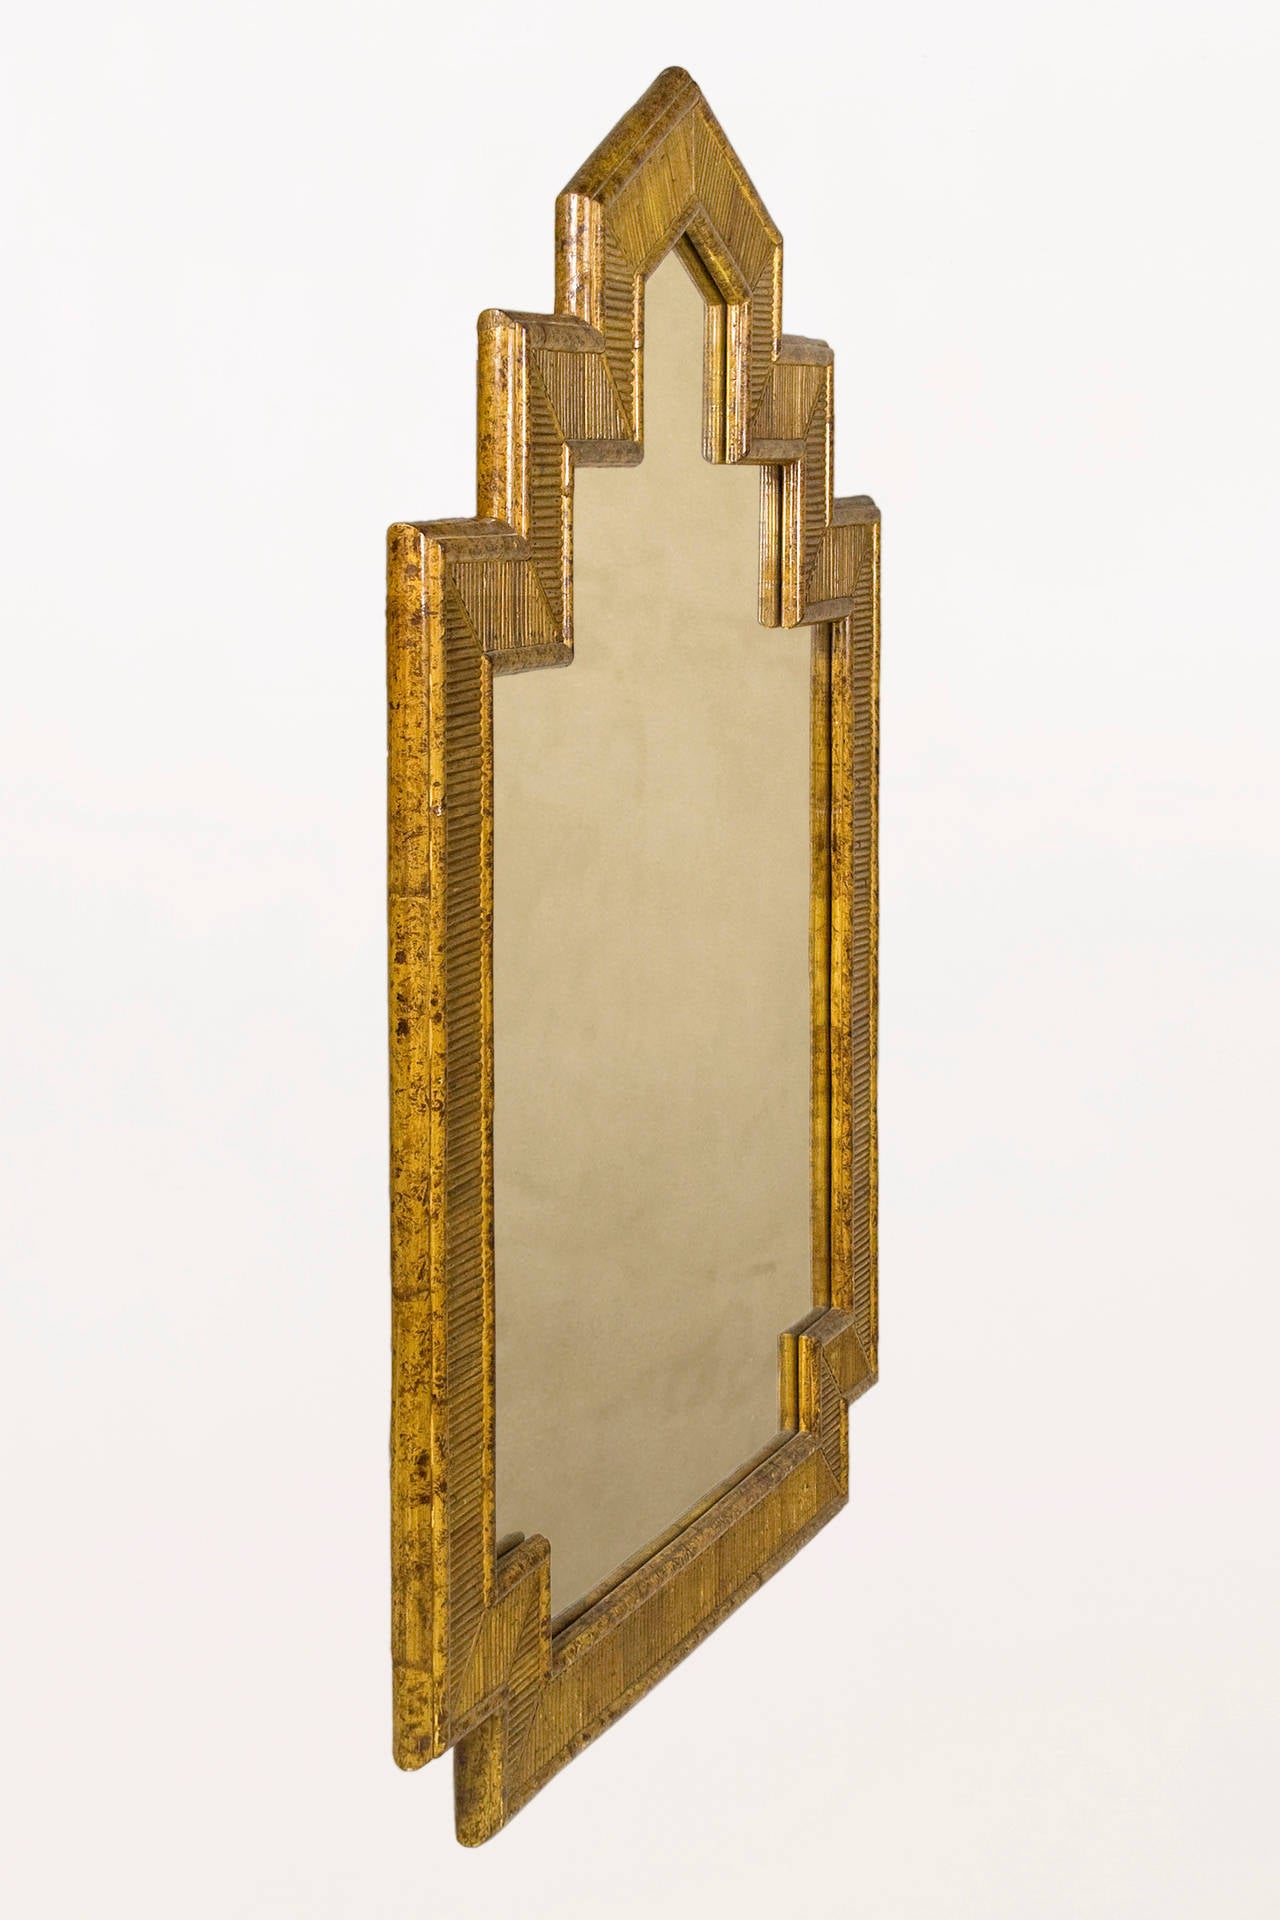 Extra Large Pierre Lottier Faux-Bamboo Mirror
Bamboo Frame, Painted Faux-Bamboo by Spain's Renowned Decorator
Circa 1970, Spain
Excellent Vintage Condition